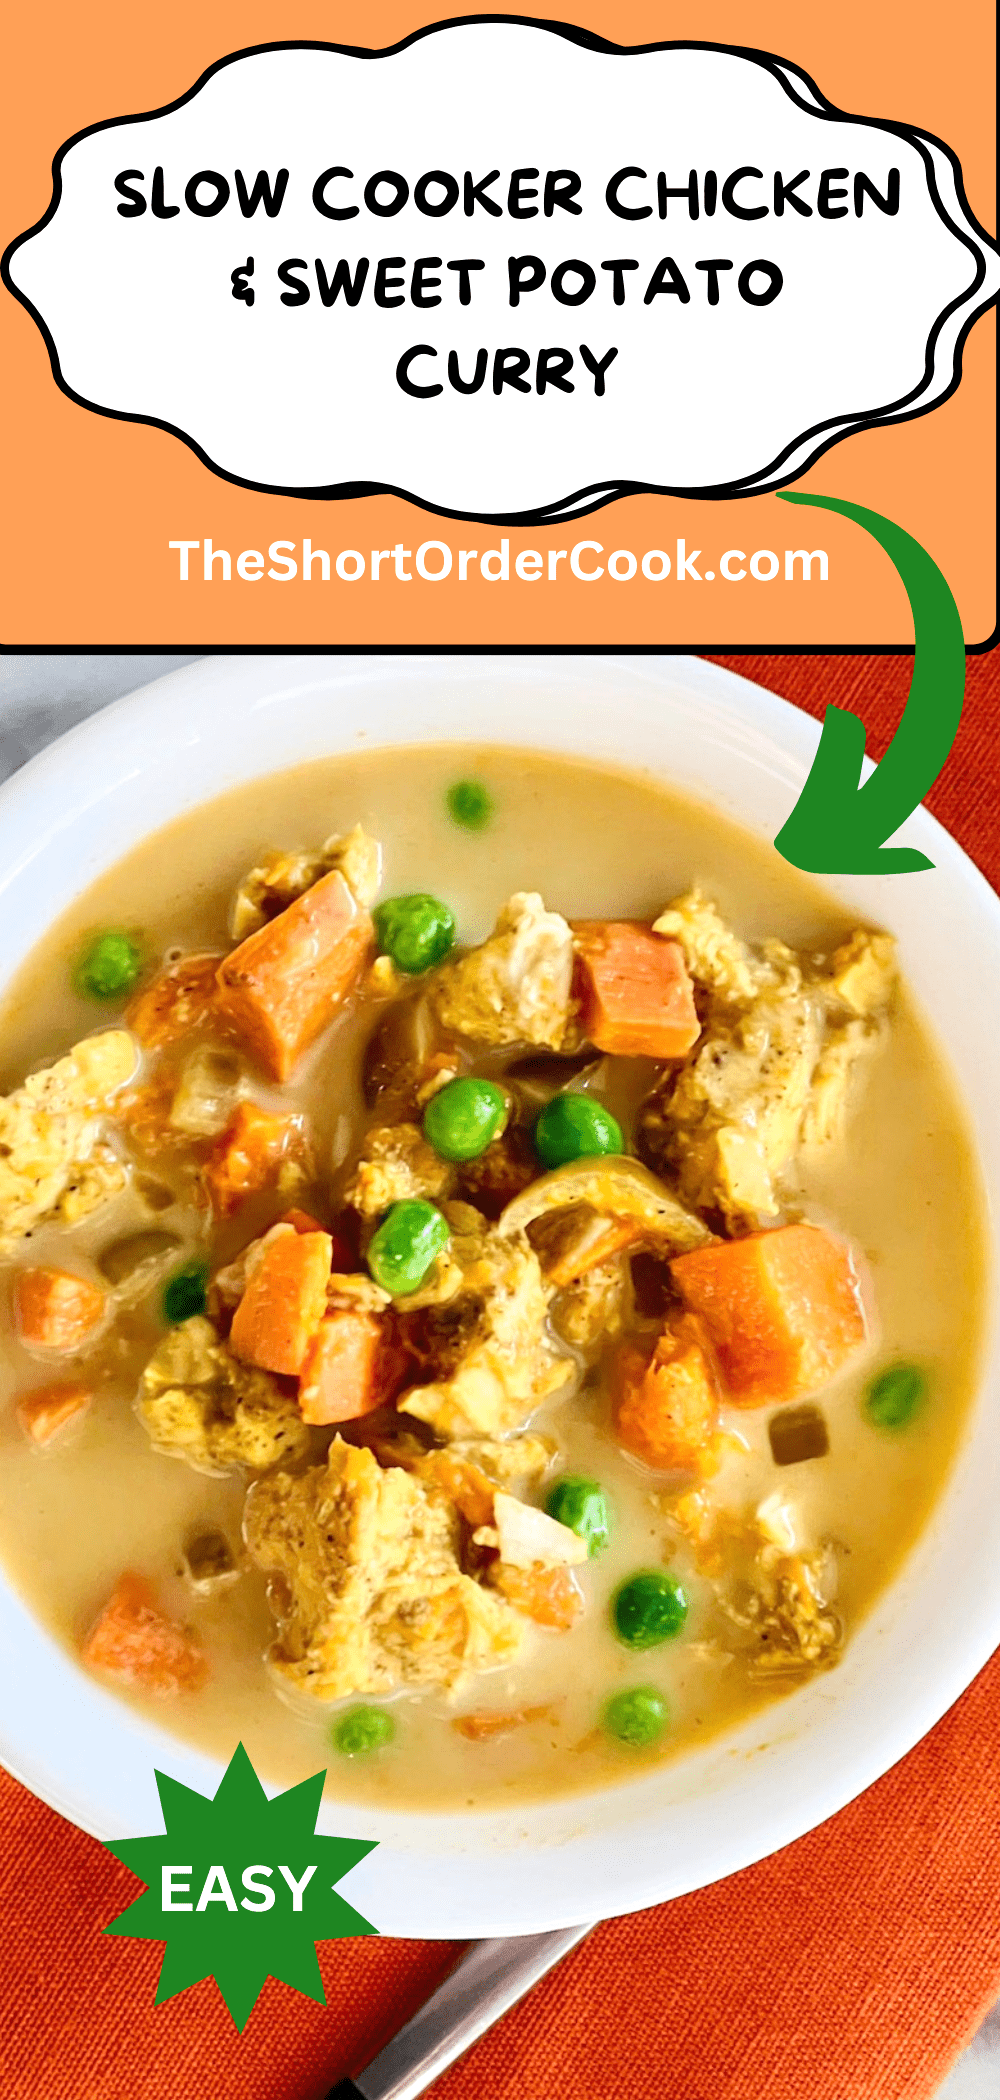 Bowl of rich coconut milk curry with chicken, peas, and sweet potatoes.